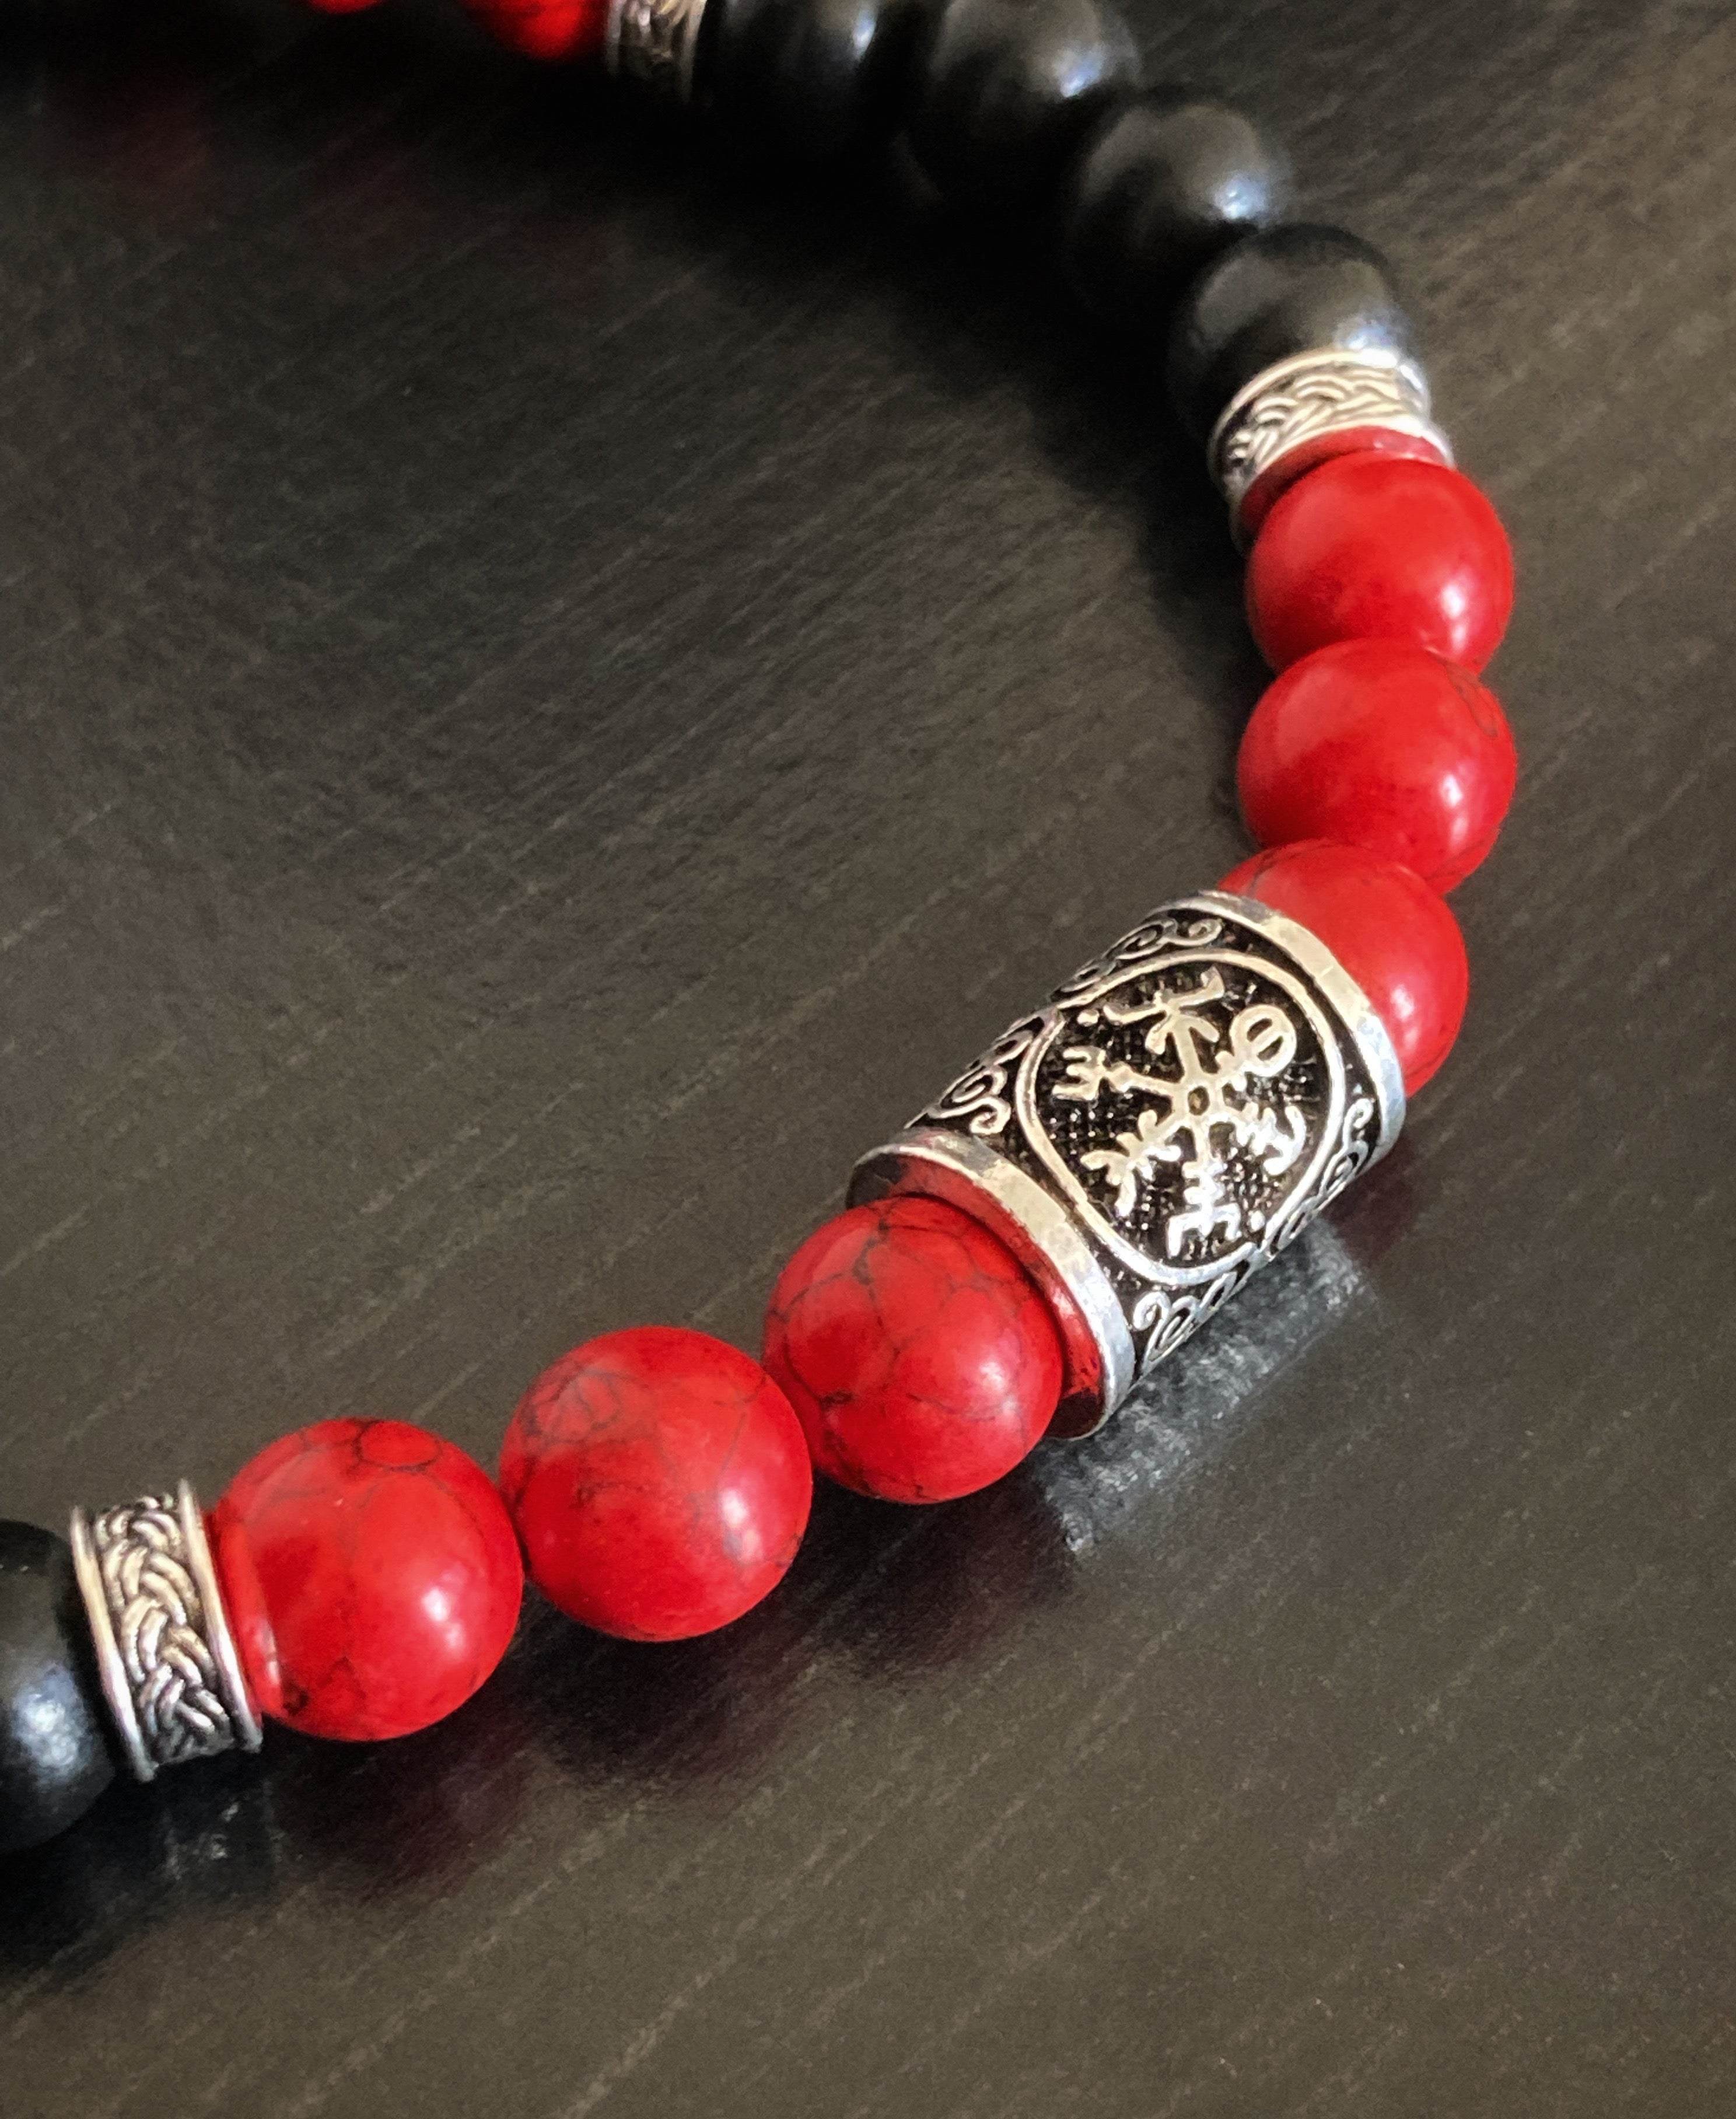 Coral Gemstone Beads: Markets And Meanings By Gem Expert